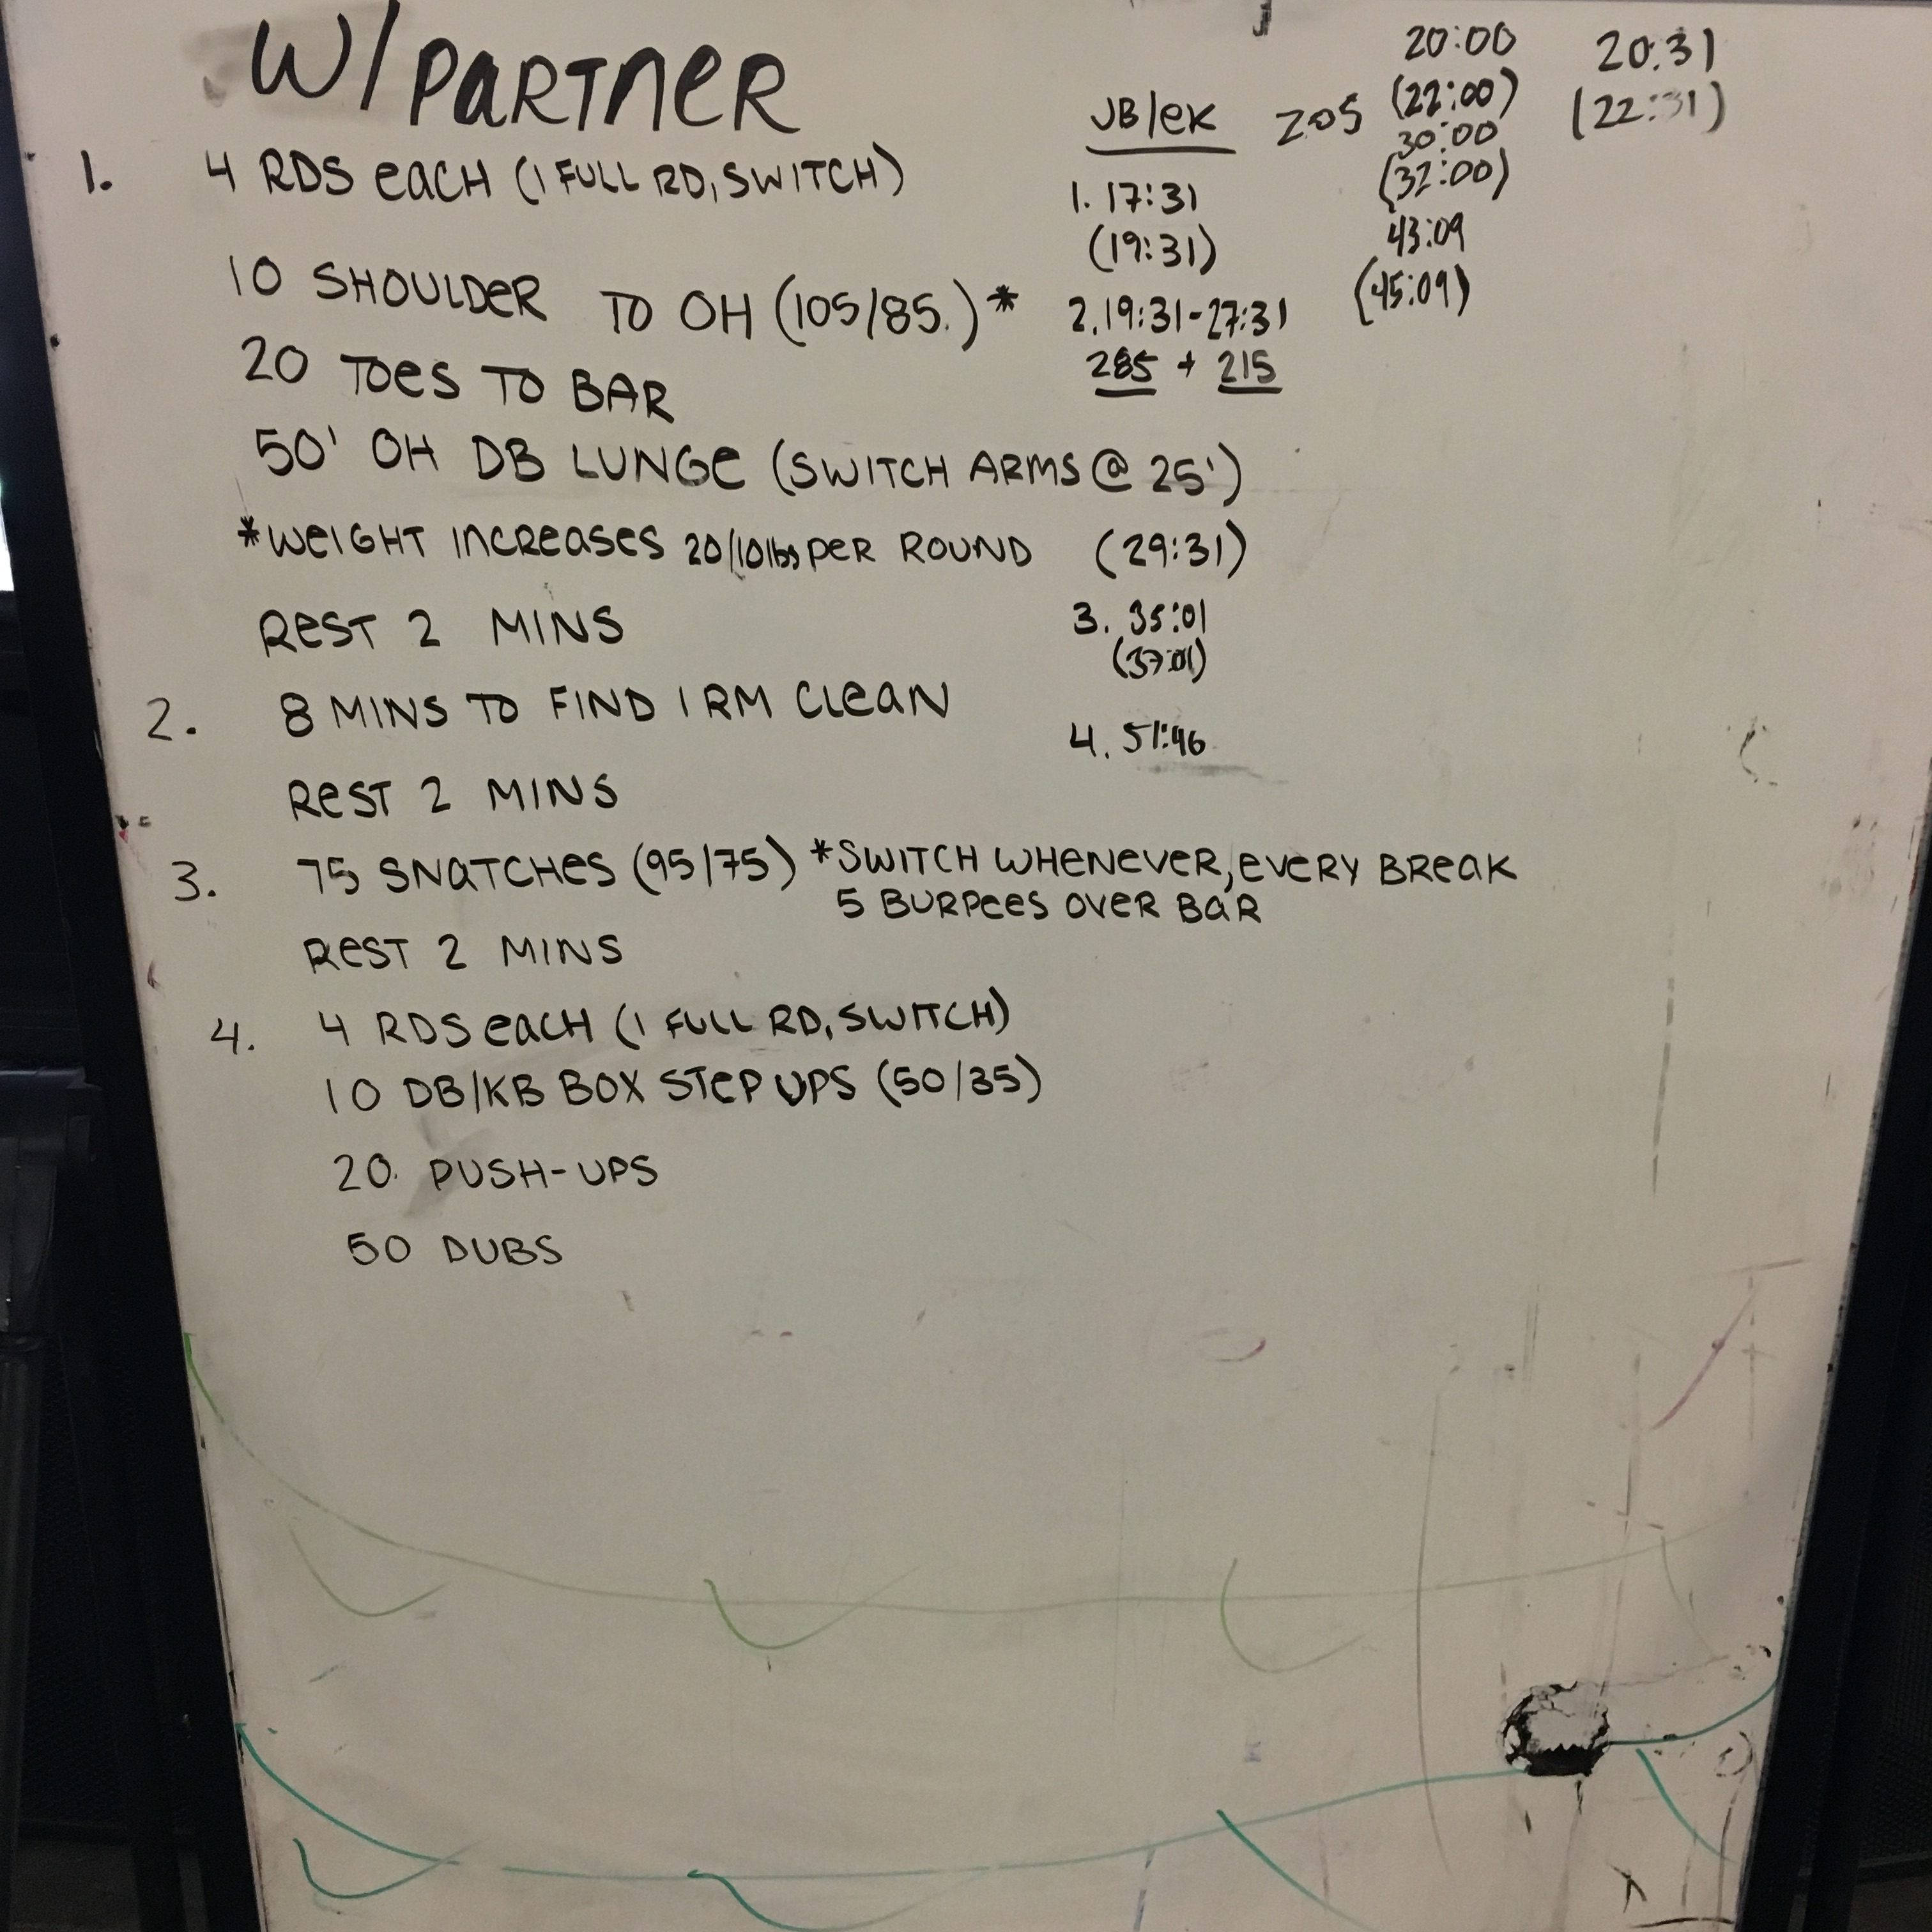 This is the Emily & Joe WOD from Saturday 7/1/17